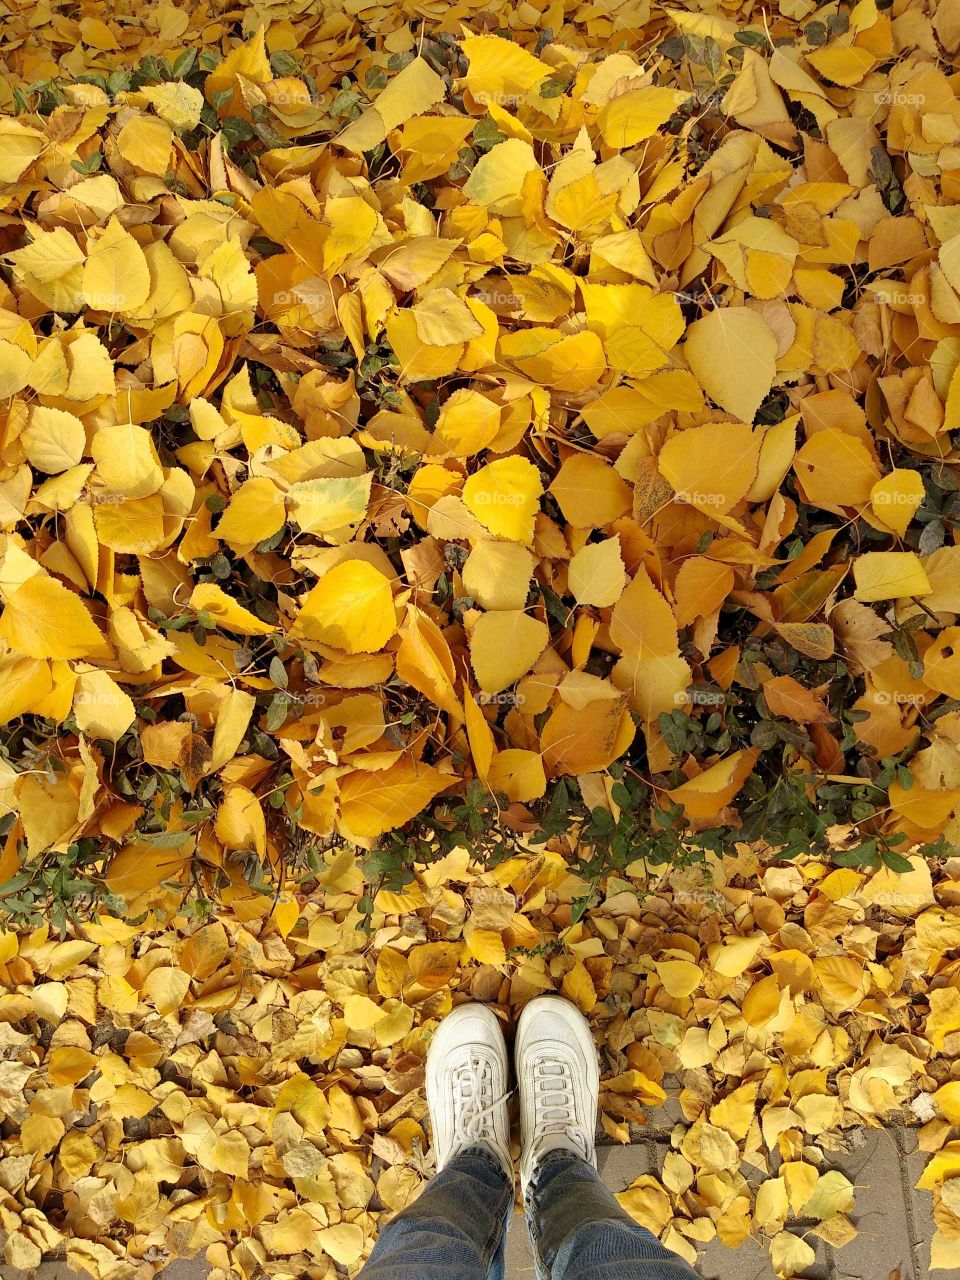 Selfie legs in white sneakers on a background of yellow leaves